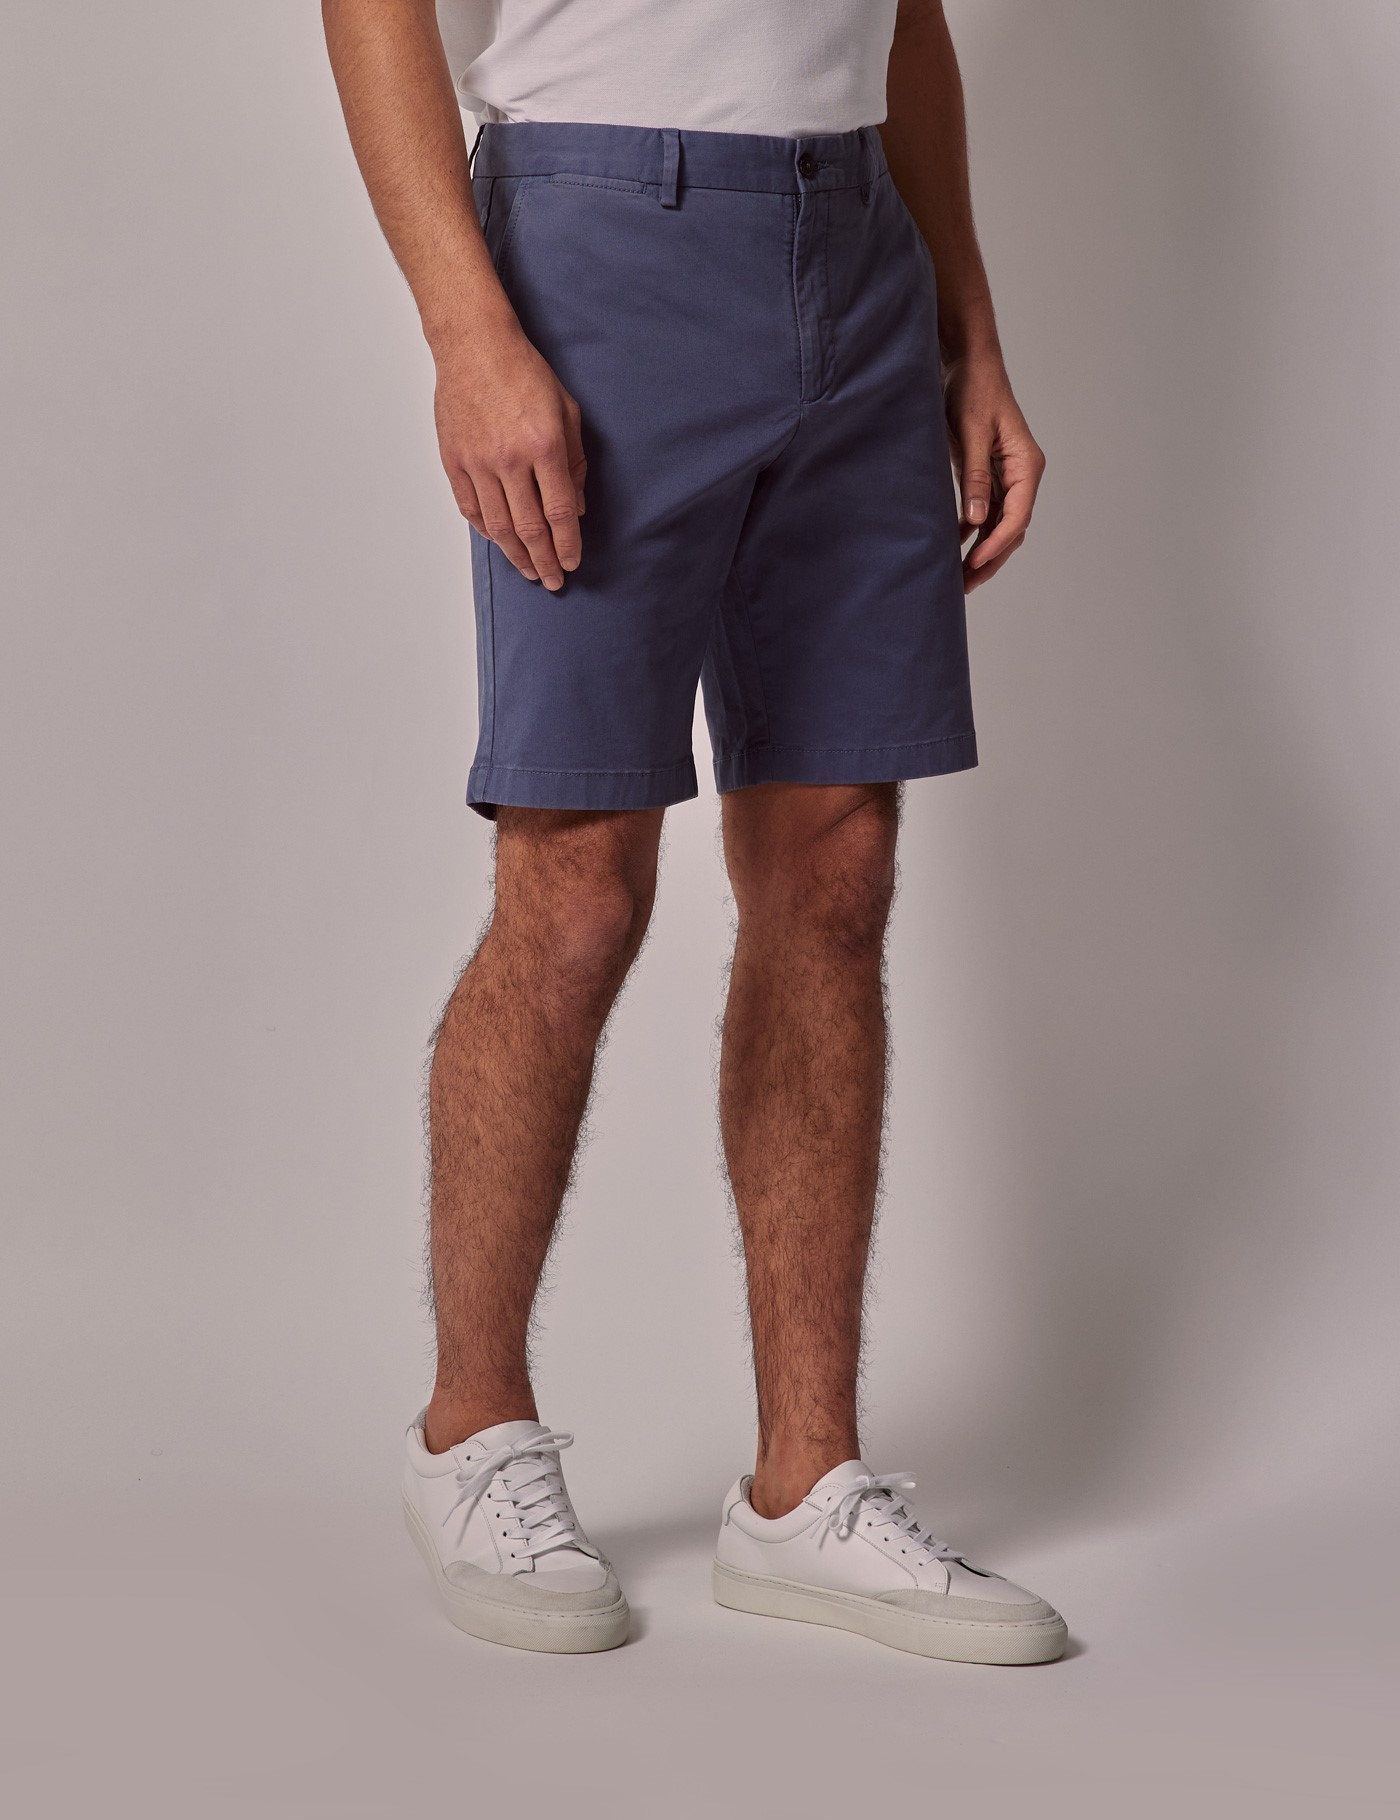 hawes & curtis airforce blue garment dyed cotton stretch chino shorts